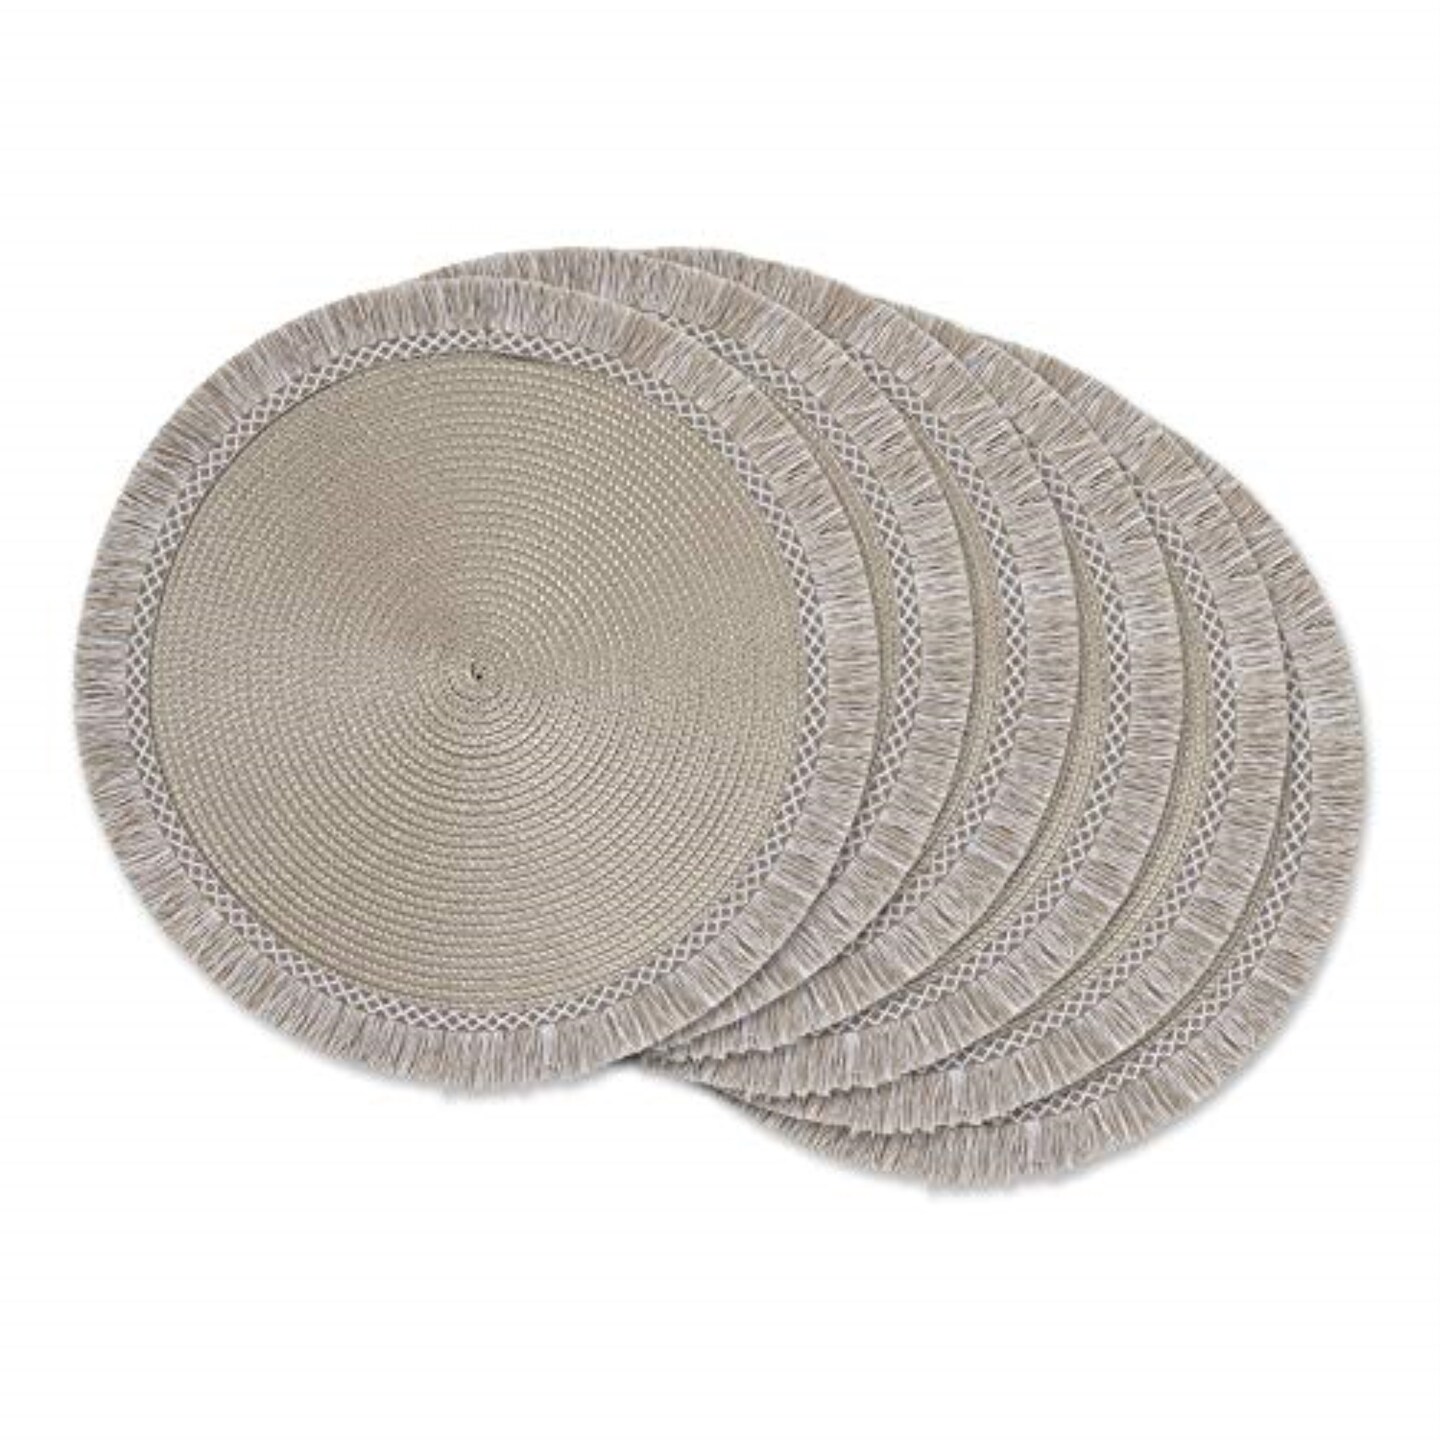 DII Stone Round Fringed Placemat Set of 6